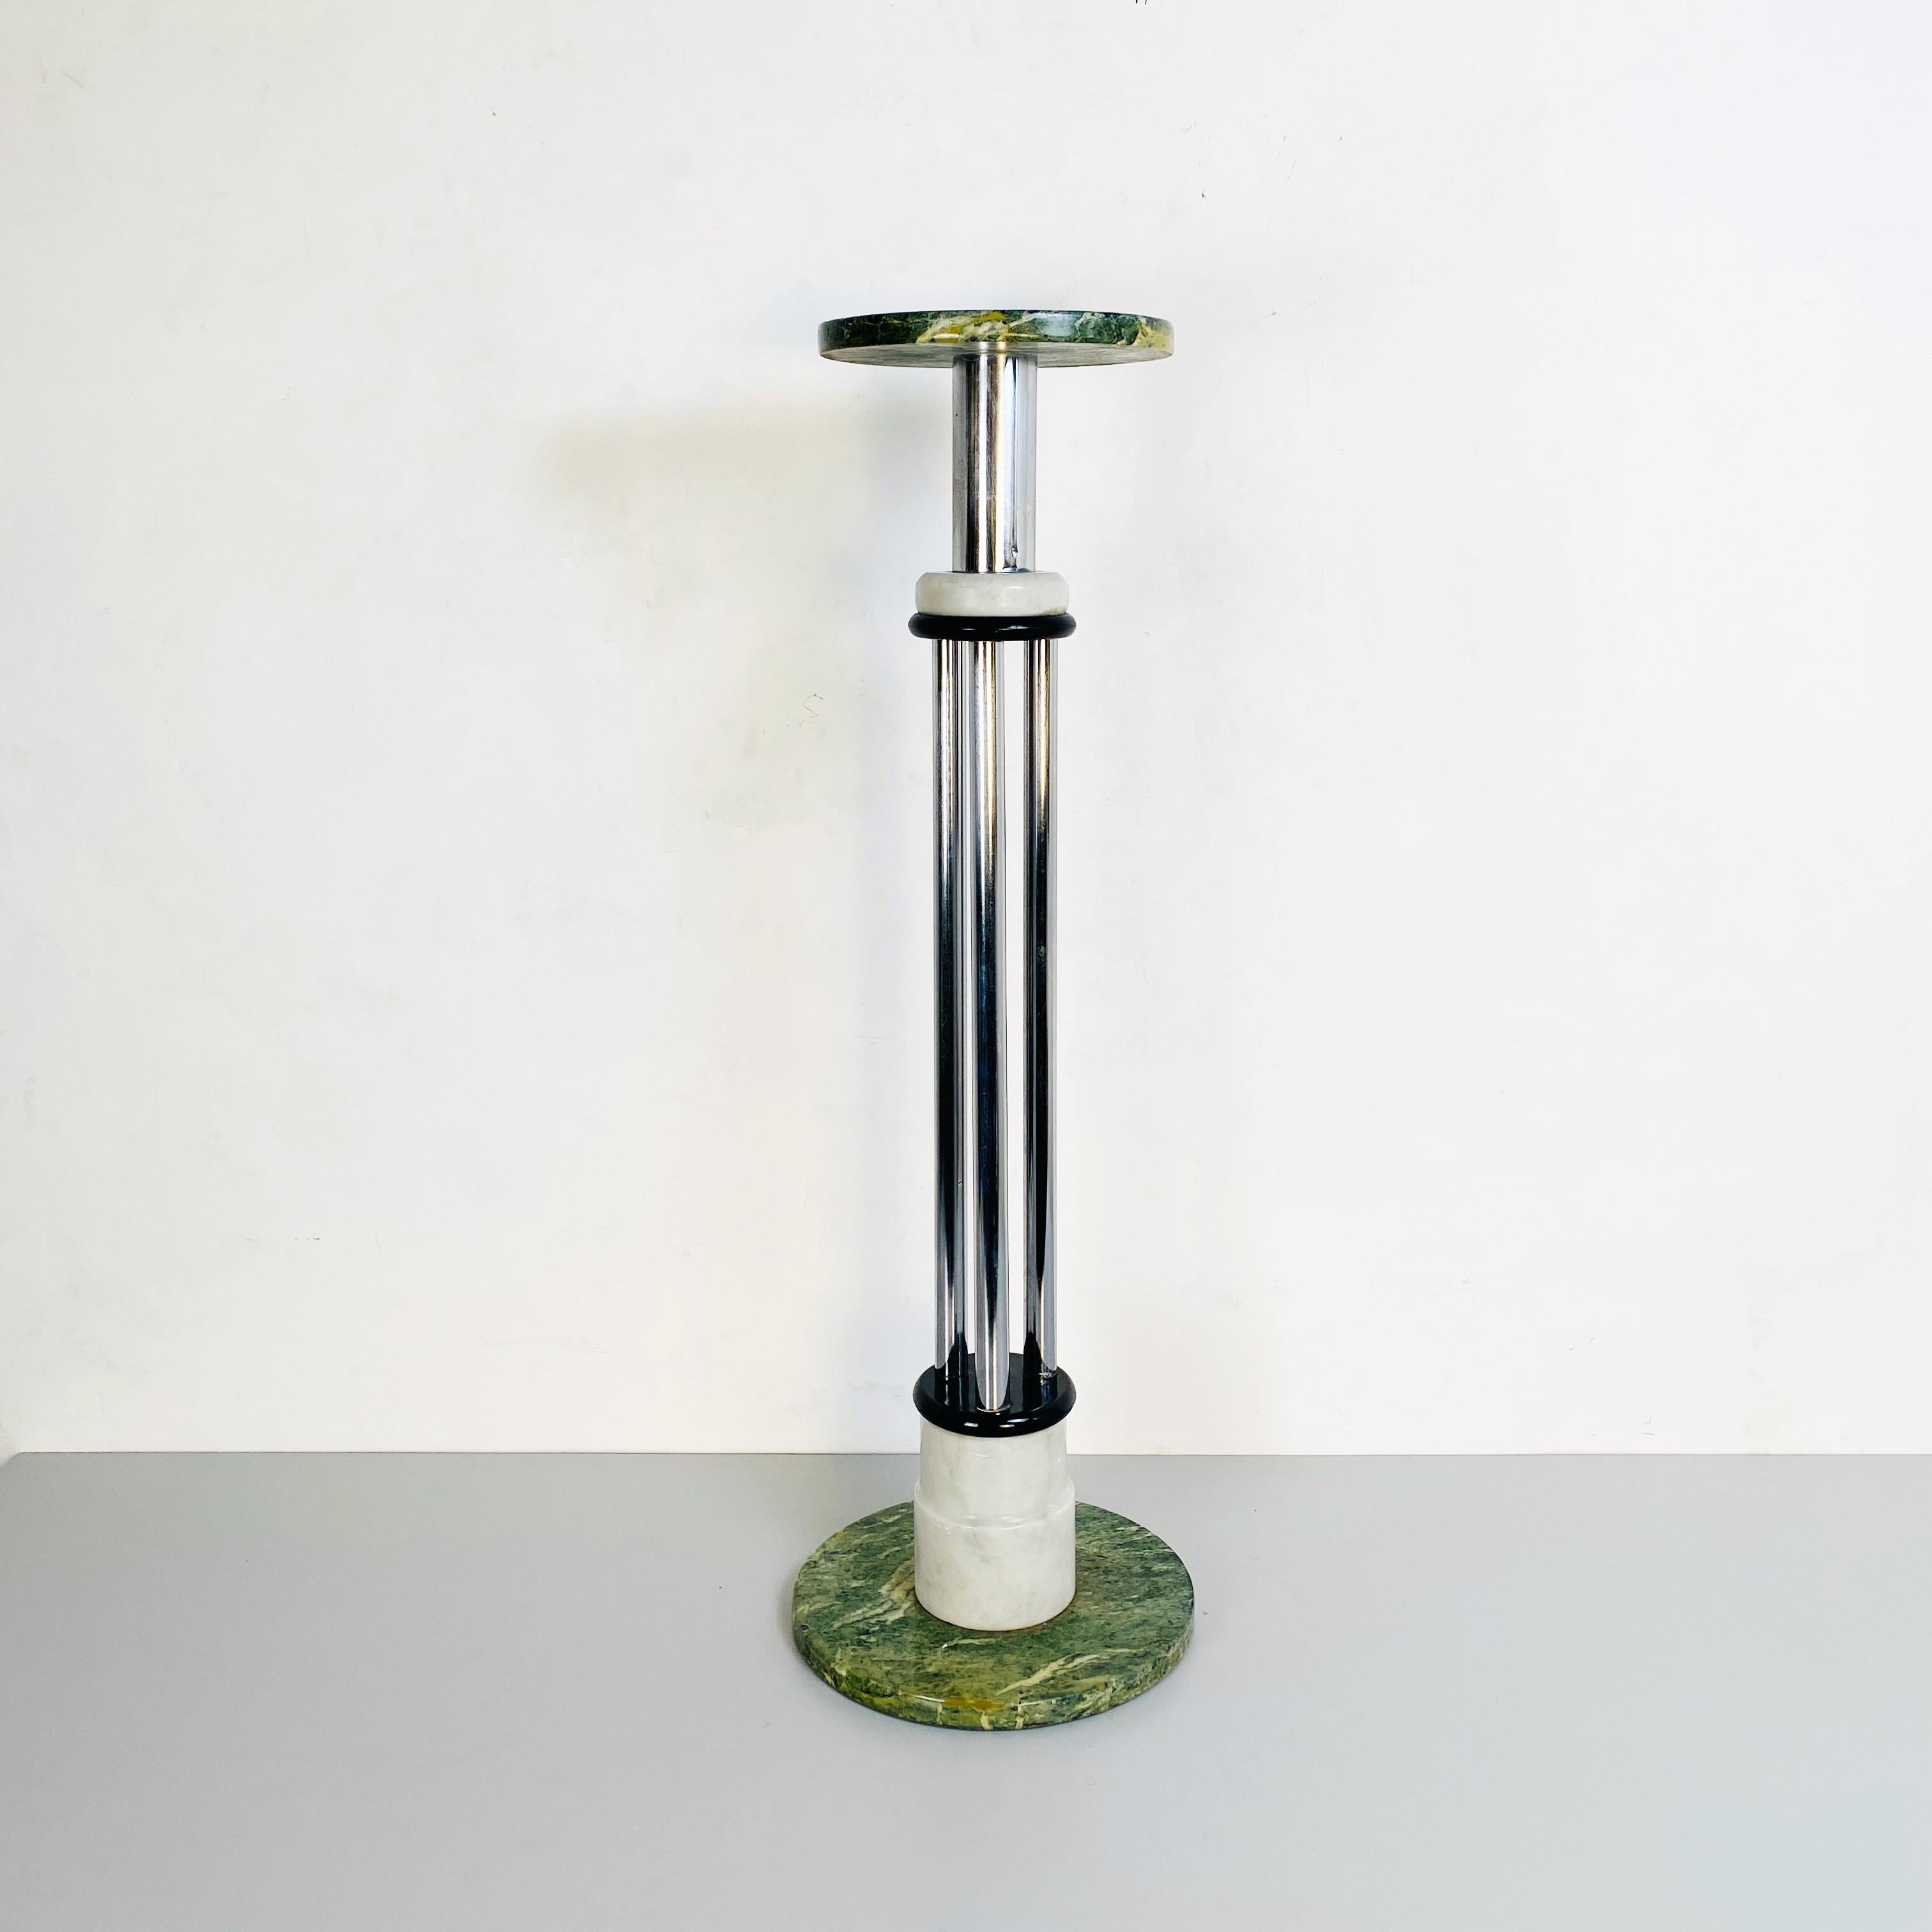 Late 20th Century Italian Mid-Century Modern Cylindrical Pedestal with Marble, 1980s